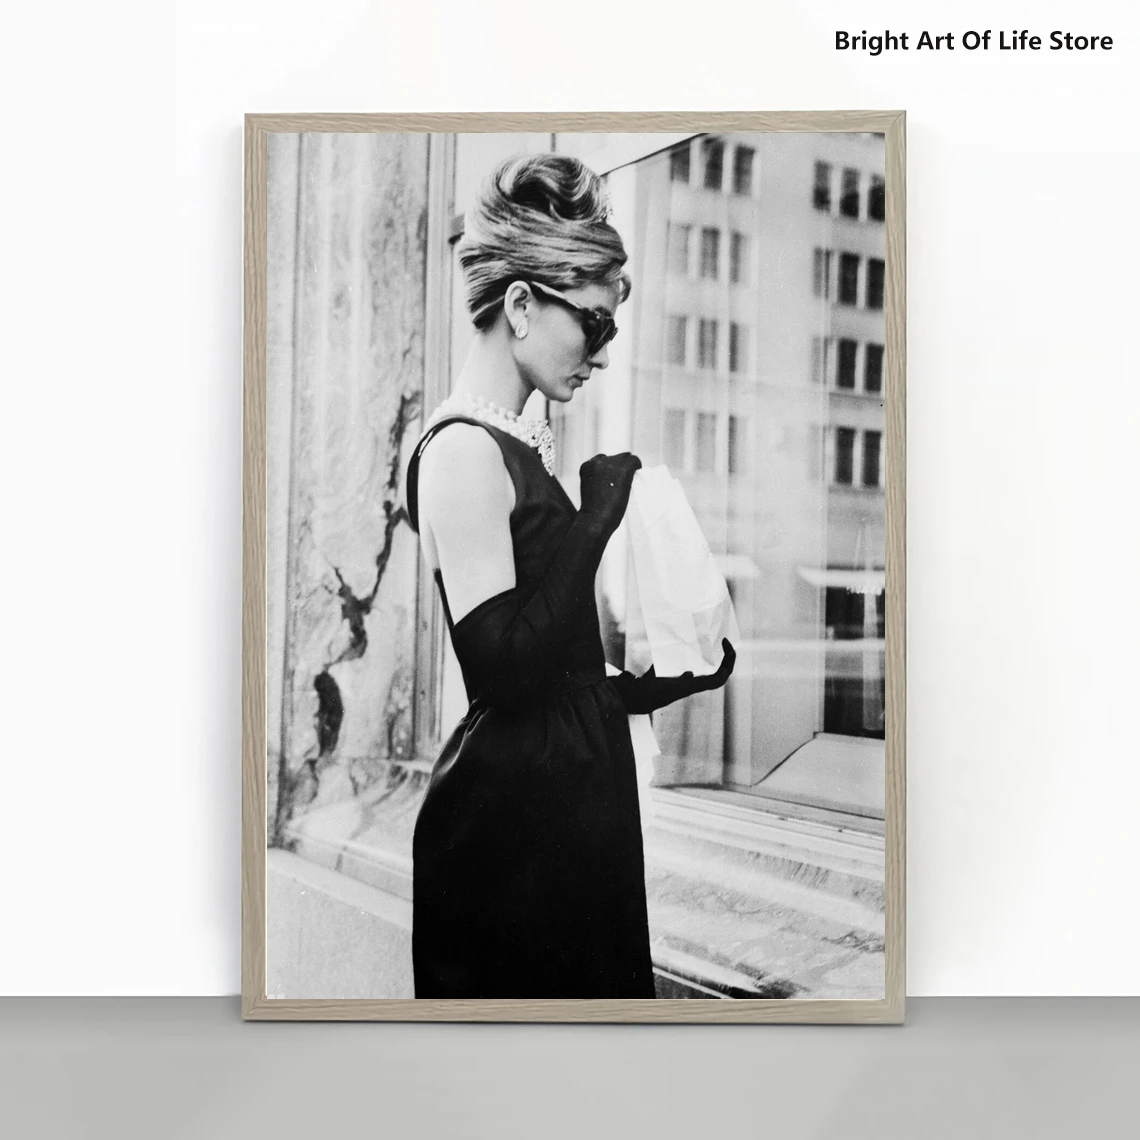 

Audrey Hepburn Breakfast At Tiffany's Movie Poster, High Quality Print, Vintage Art Photography, Home Décor Wall Art Fashion